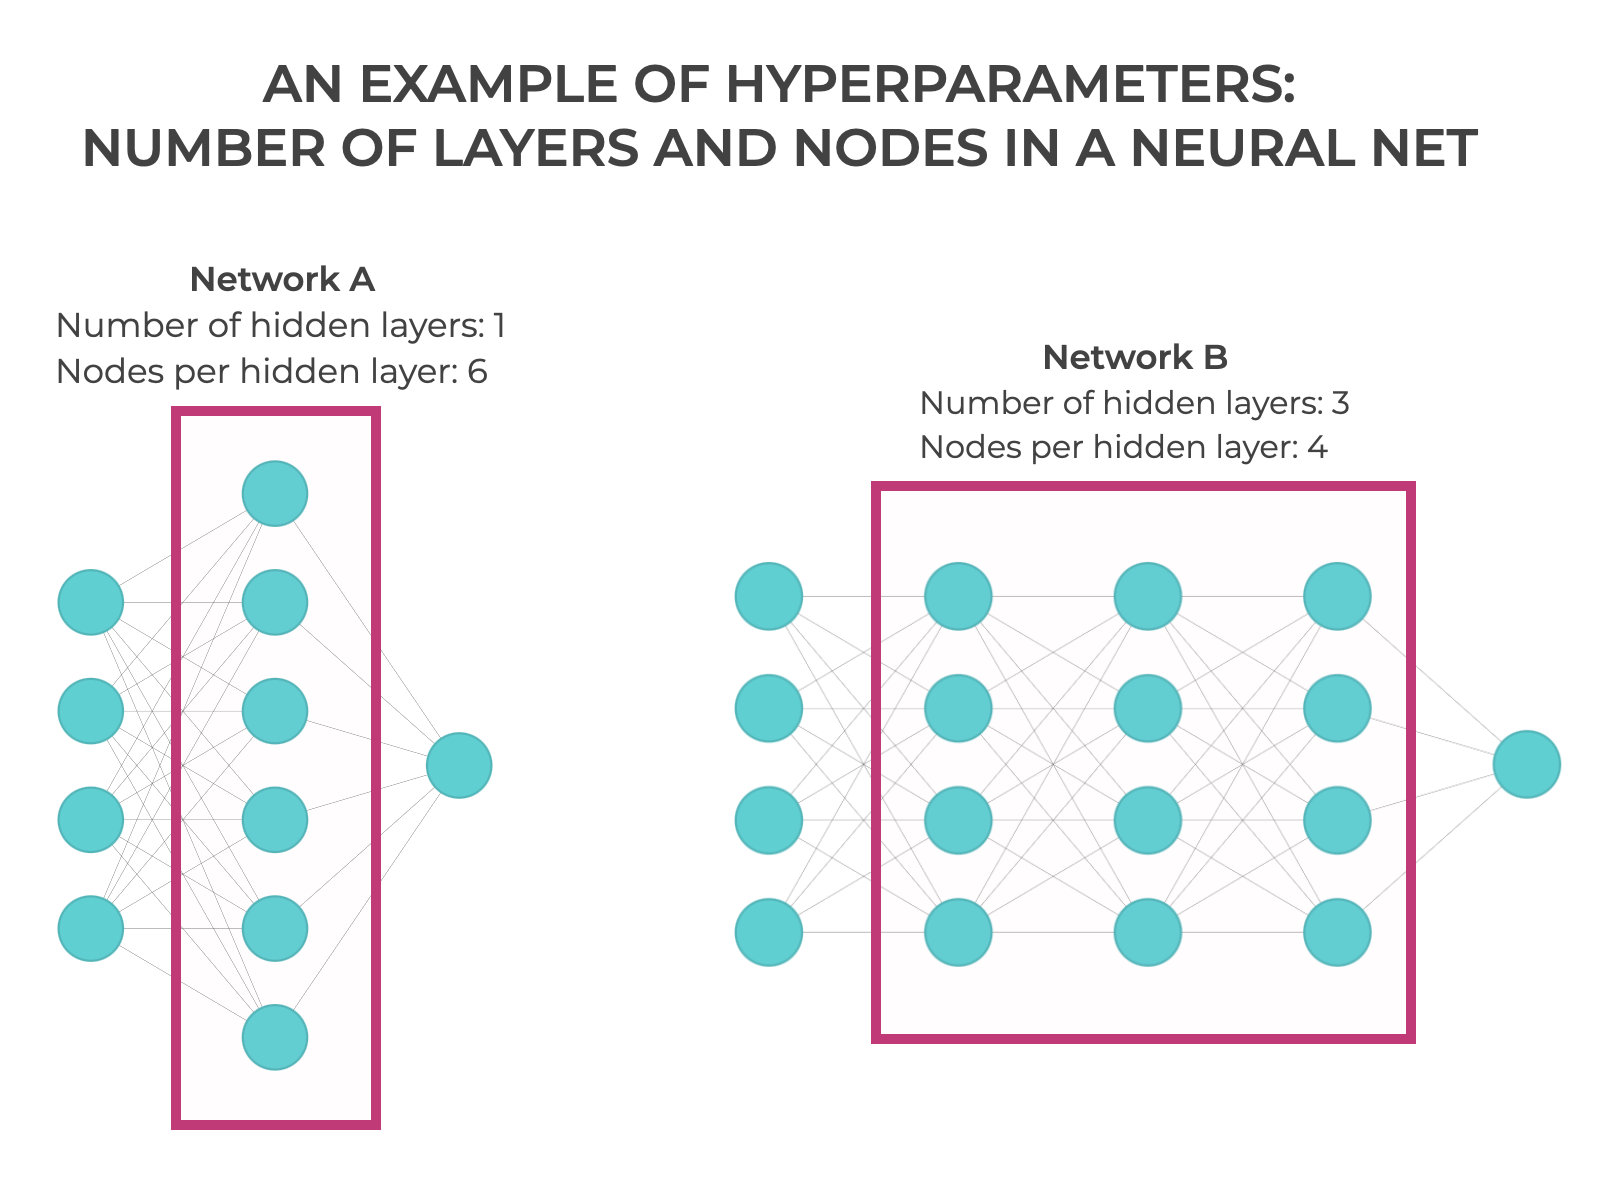 An example that shows machine learning hyperparameters.  There are two neural networks, one with 1 hidden layer that has 6 nodes and another network that has 3 hidden layers each with 4 nodes.  The number of layers is a hyperparameter and the number of nodes per layer is a hyperparameter.